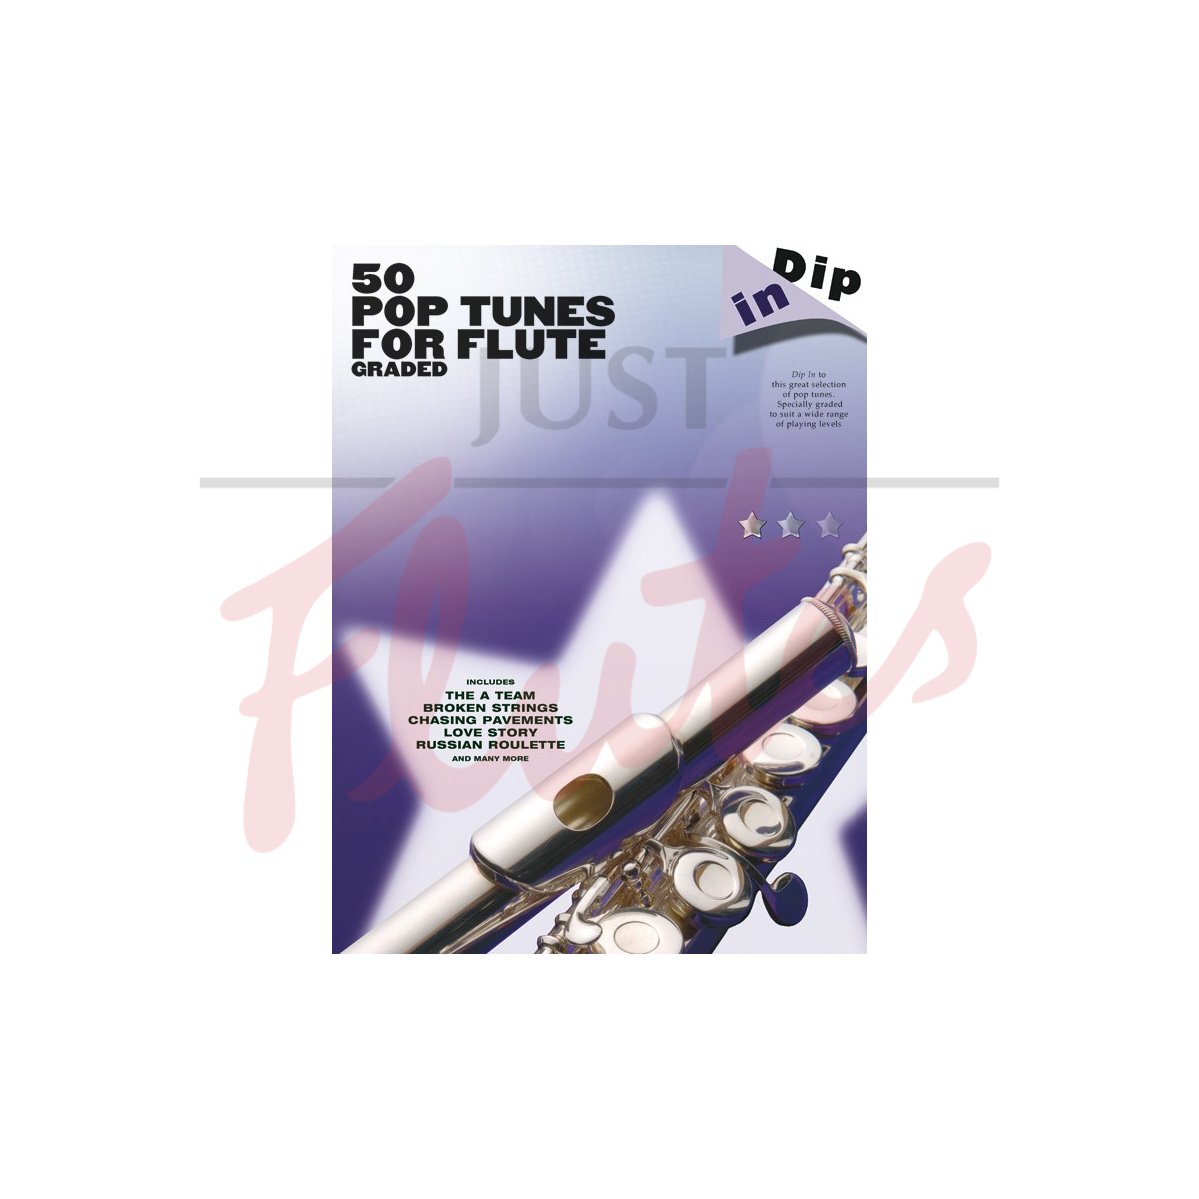 Dip In - 50 Pop Tunes for Flute